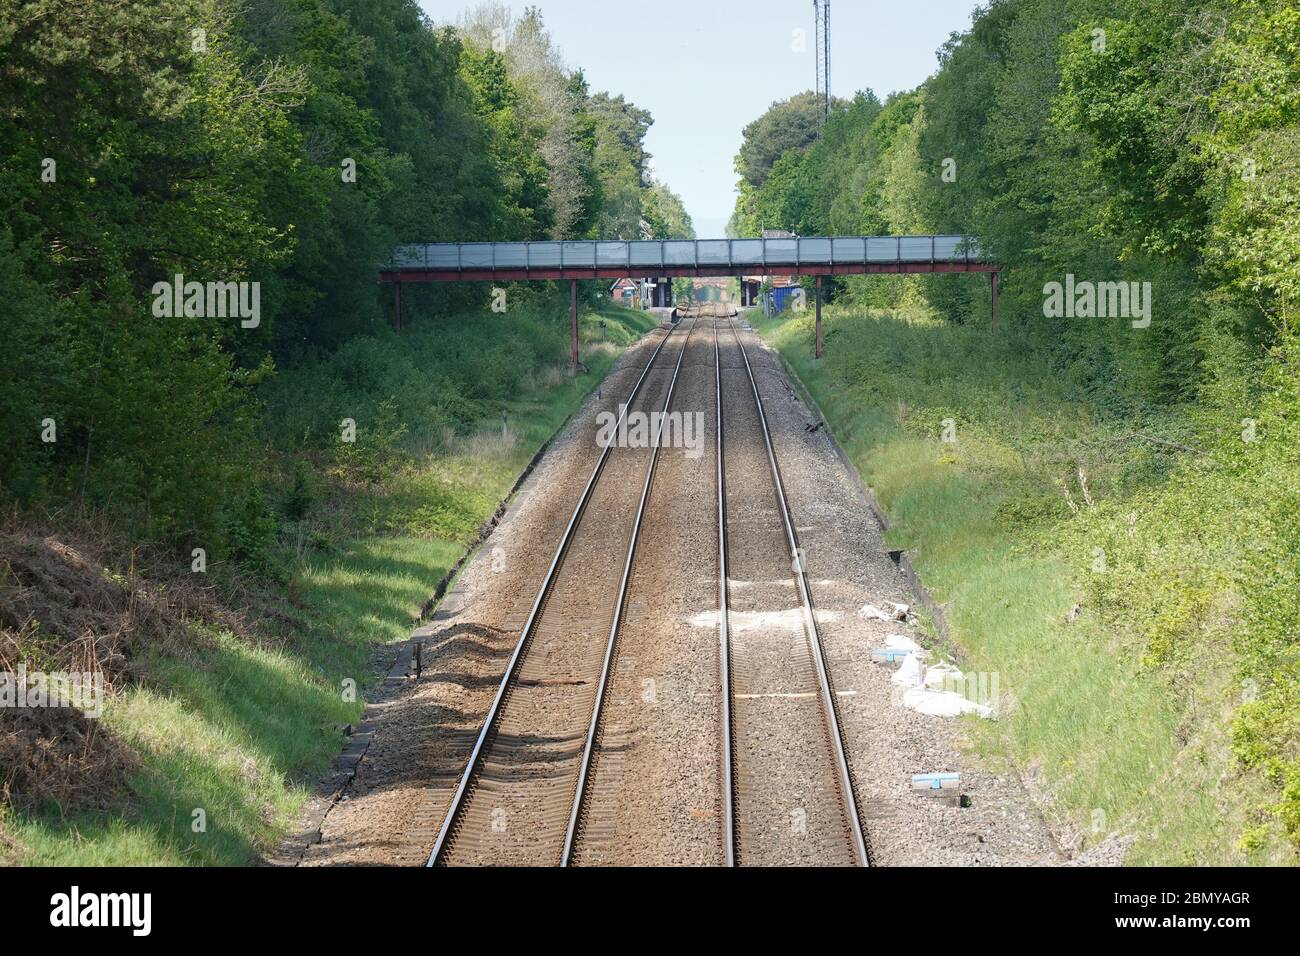 Pollock Bridge connecting Wellingto College to its Derby Field situated just south of Crowthorne Station. Stock Photo